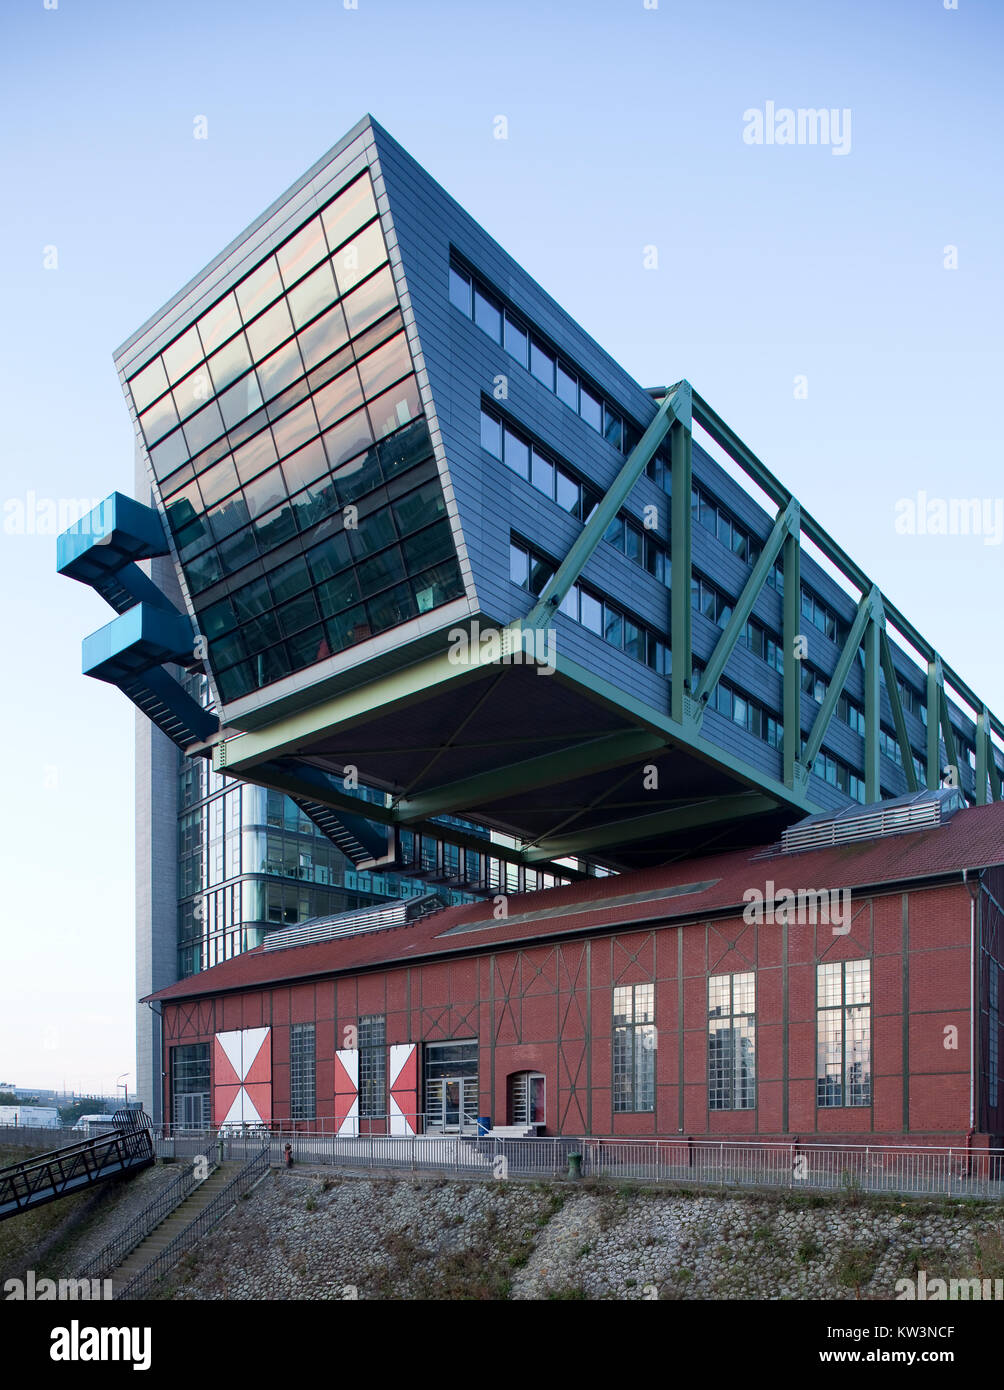 'Port Event Center' at the 'Medienhafen' in Düsseldorf, Germany at the River Rhine Stock Photo